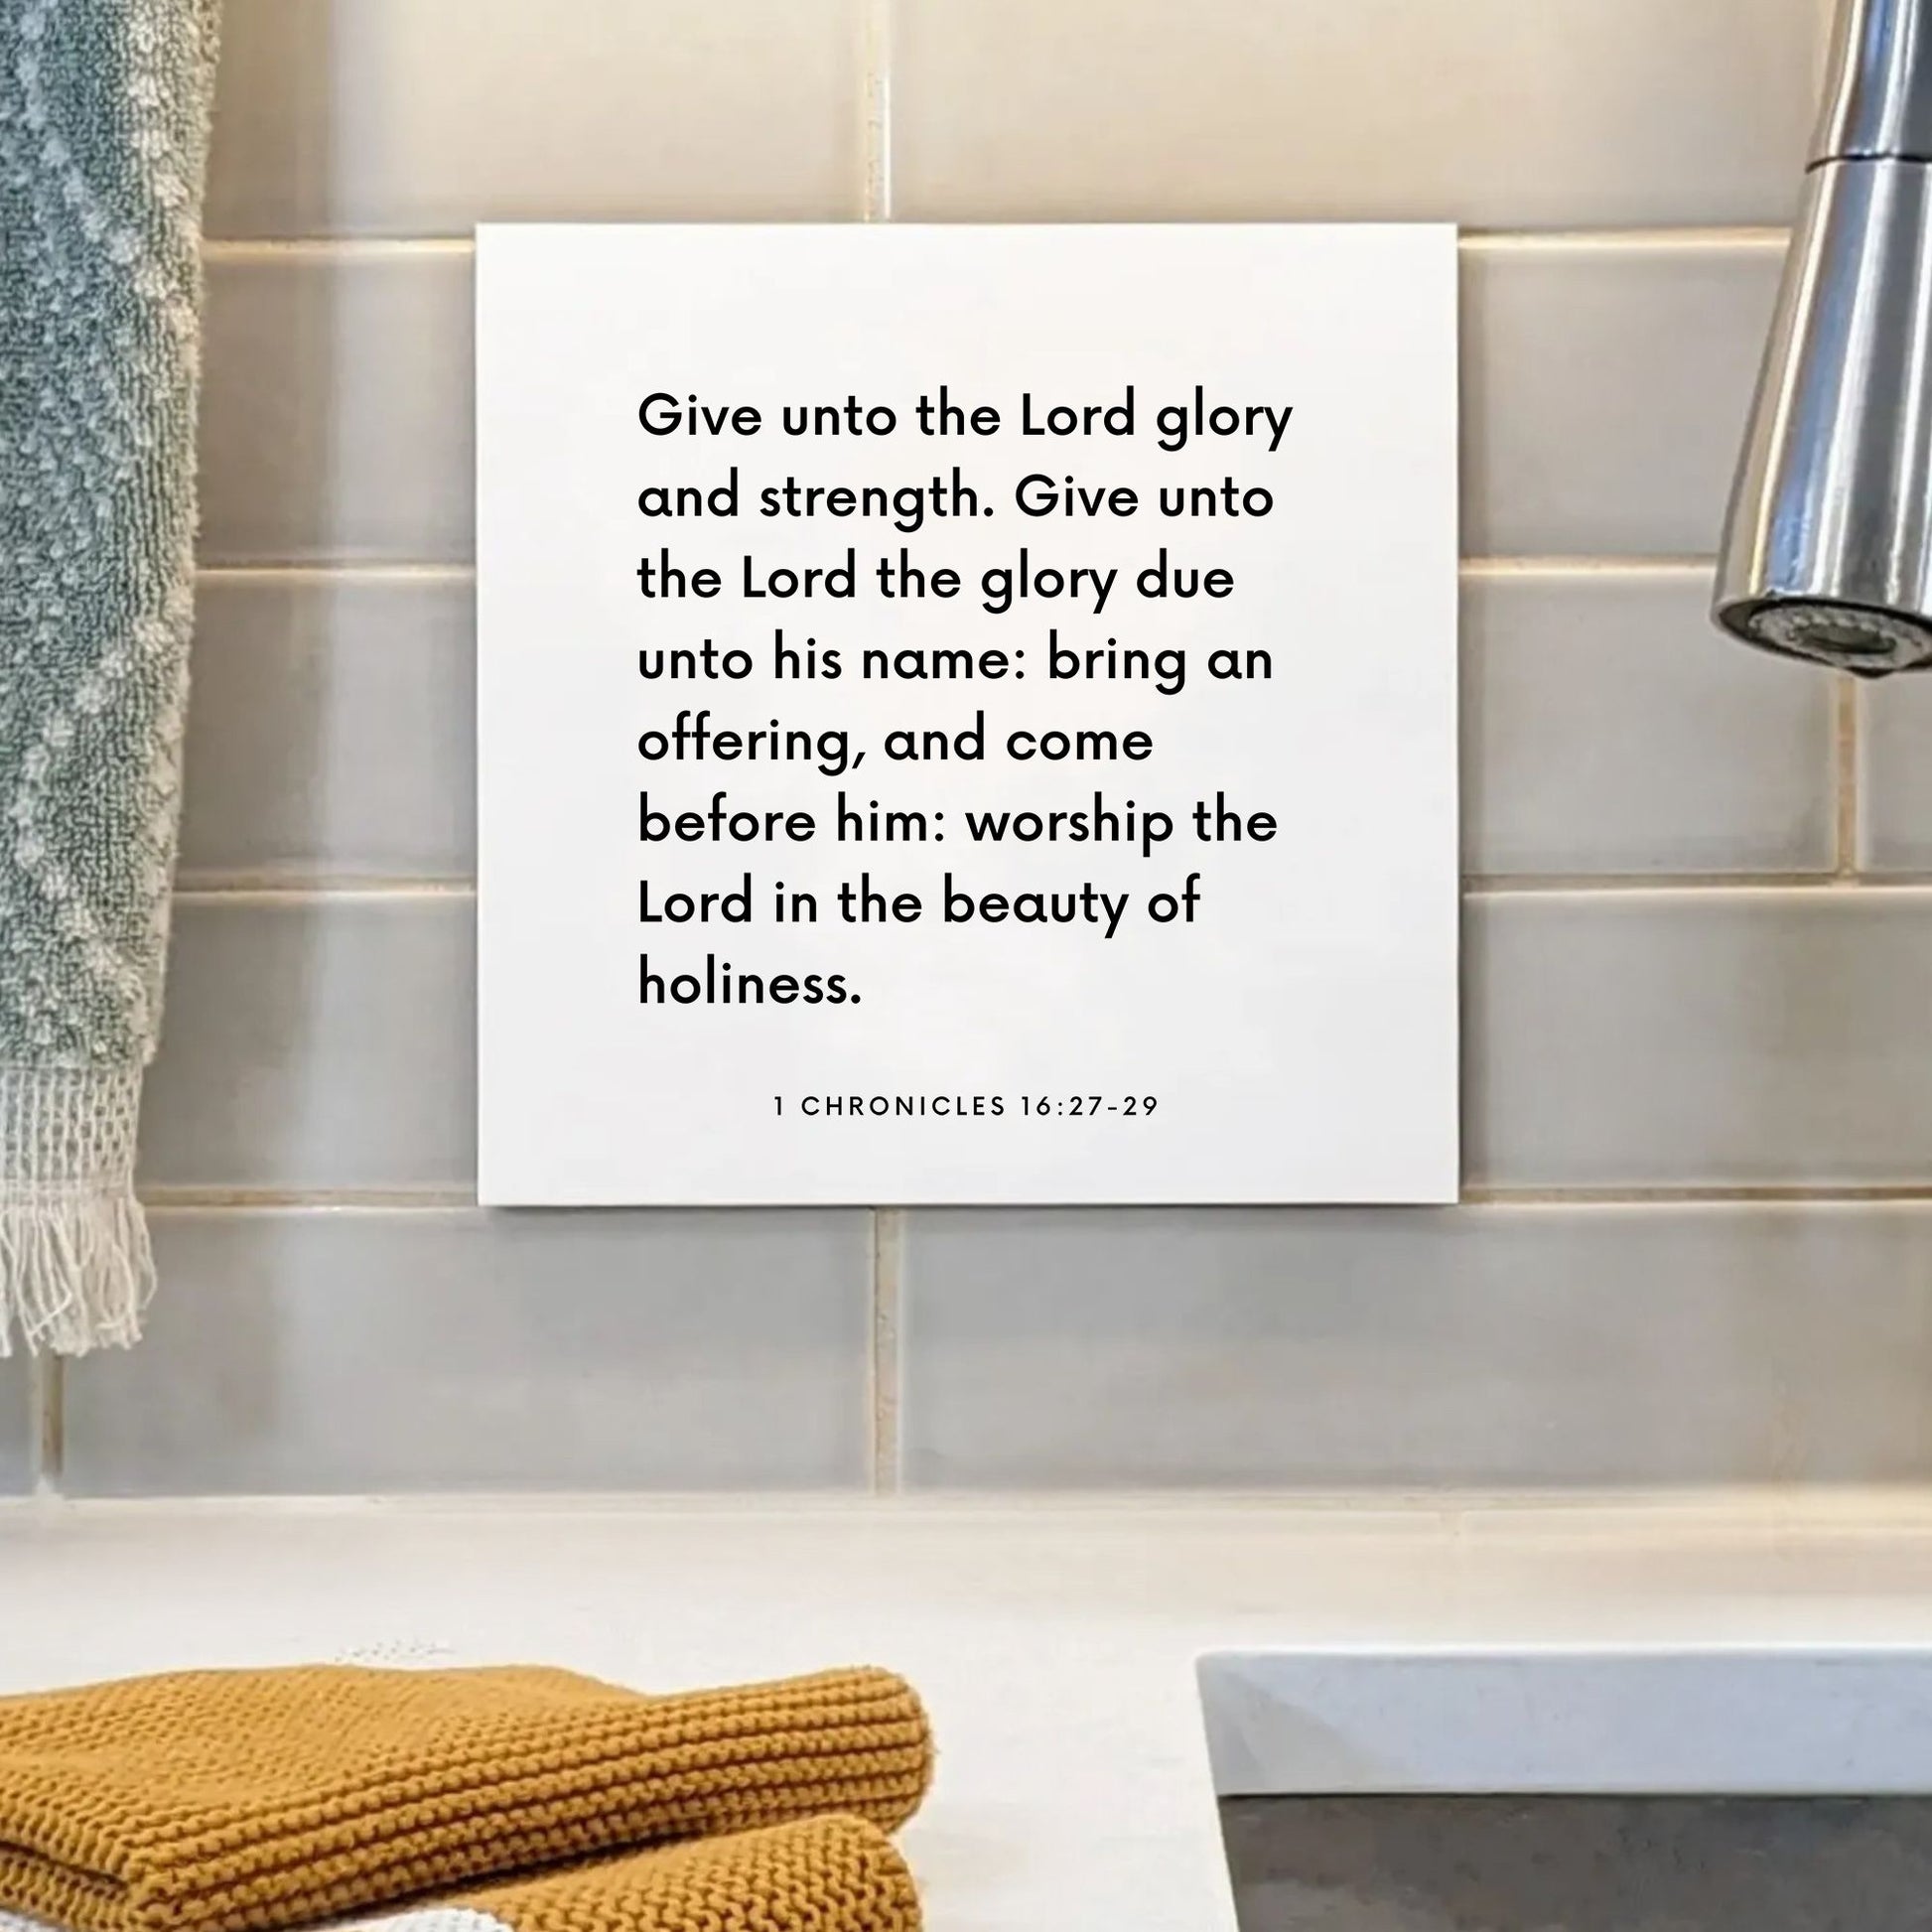 Sink mouting of the scripture tile for 1 Chronicles 16:27-29 - "Give unto the Lord glory and strength"